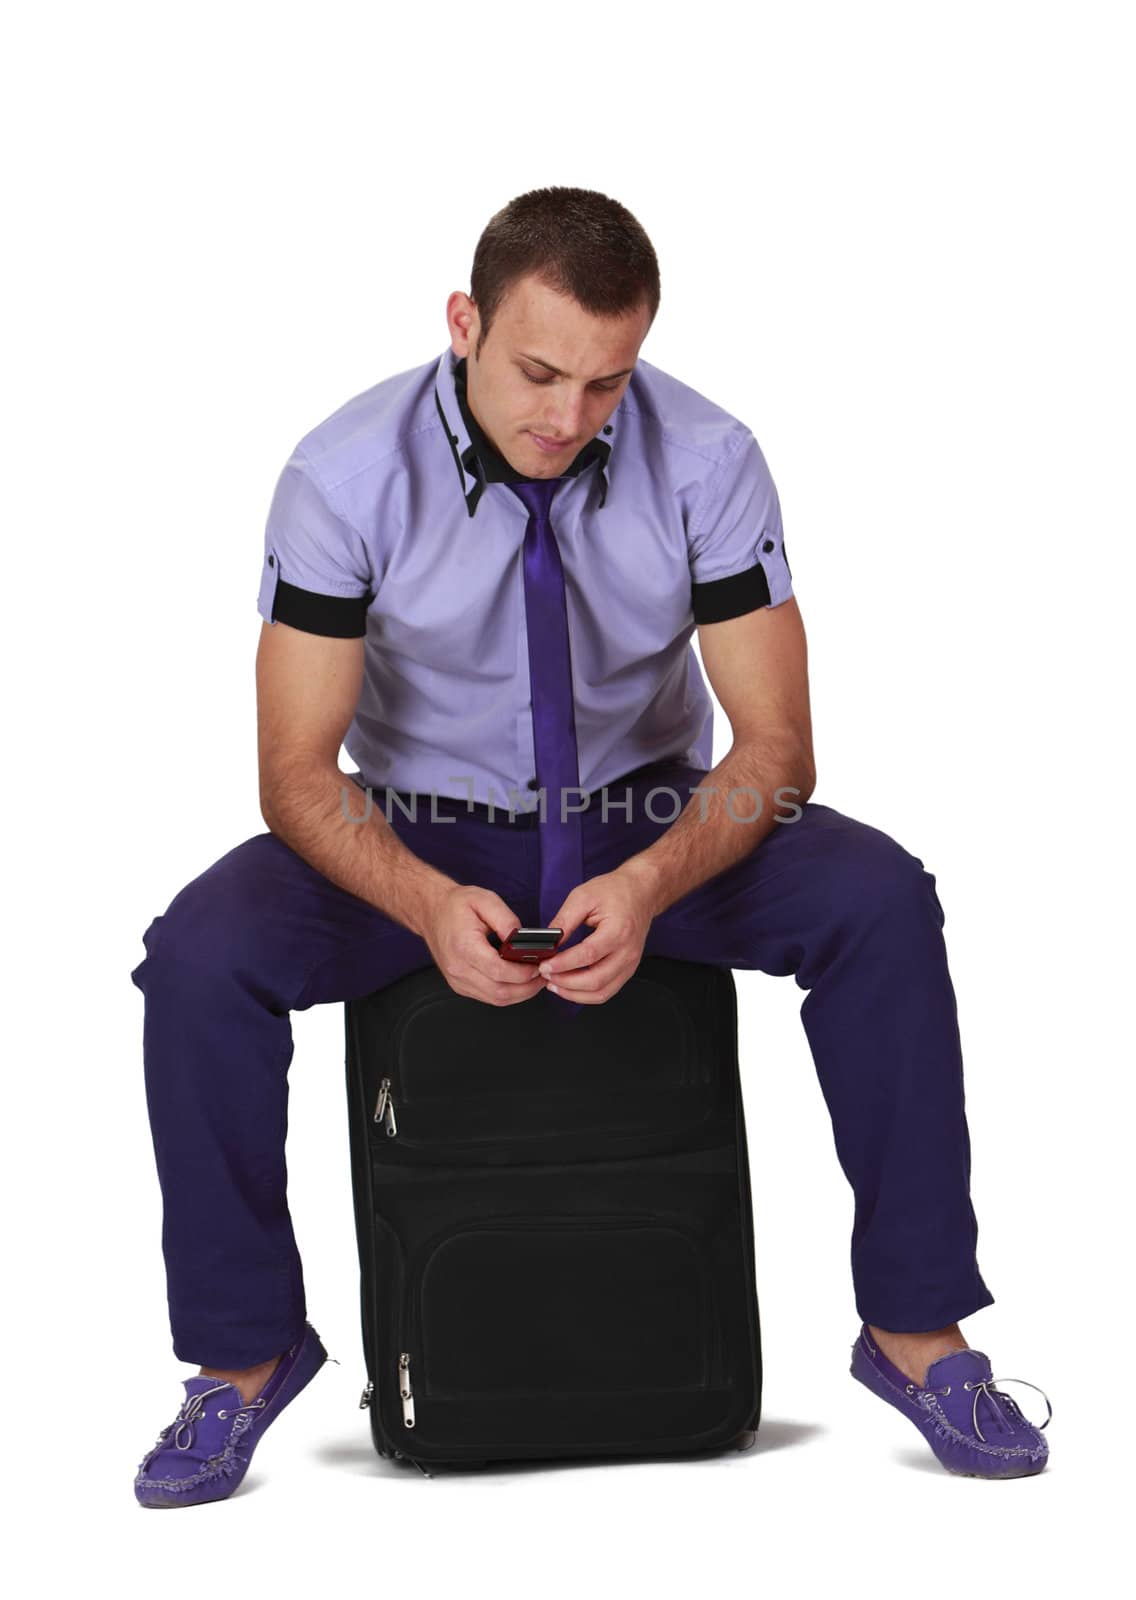 Young man sitting on a suitcase and cecking his mobile phone, isolated against a white background.